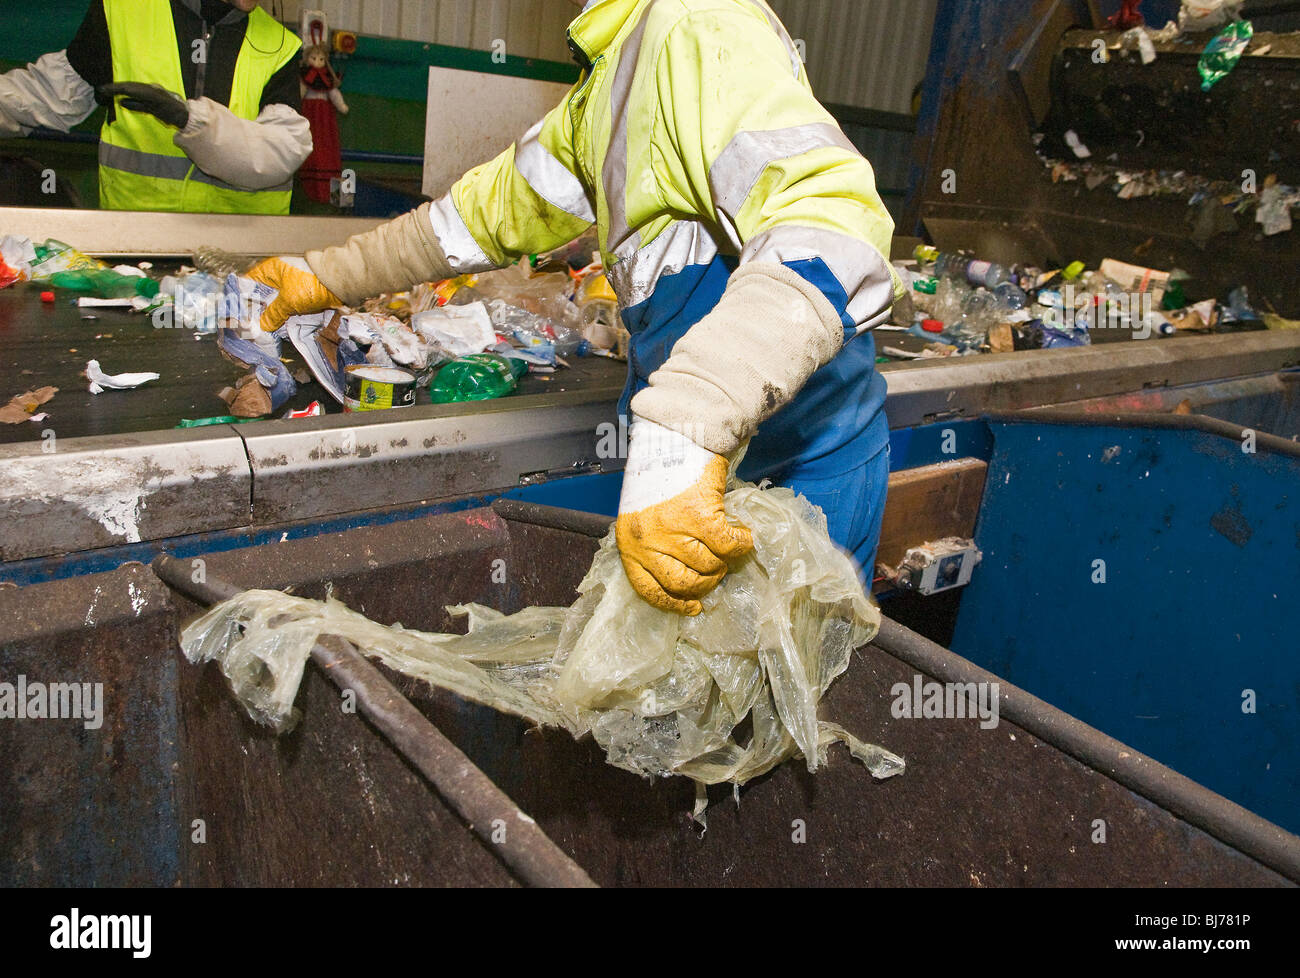 Recyclable waste sorting center. Employees on each side of the conveyor belt manually sort the different types of waste according to their recycling. Stock Photo